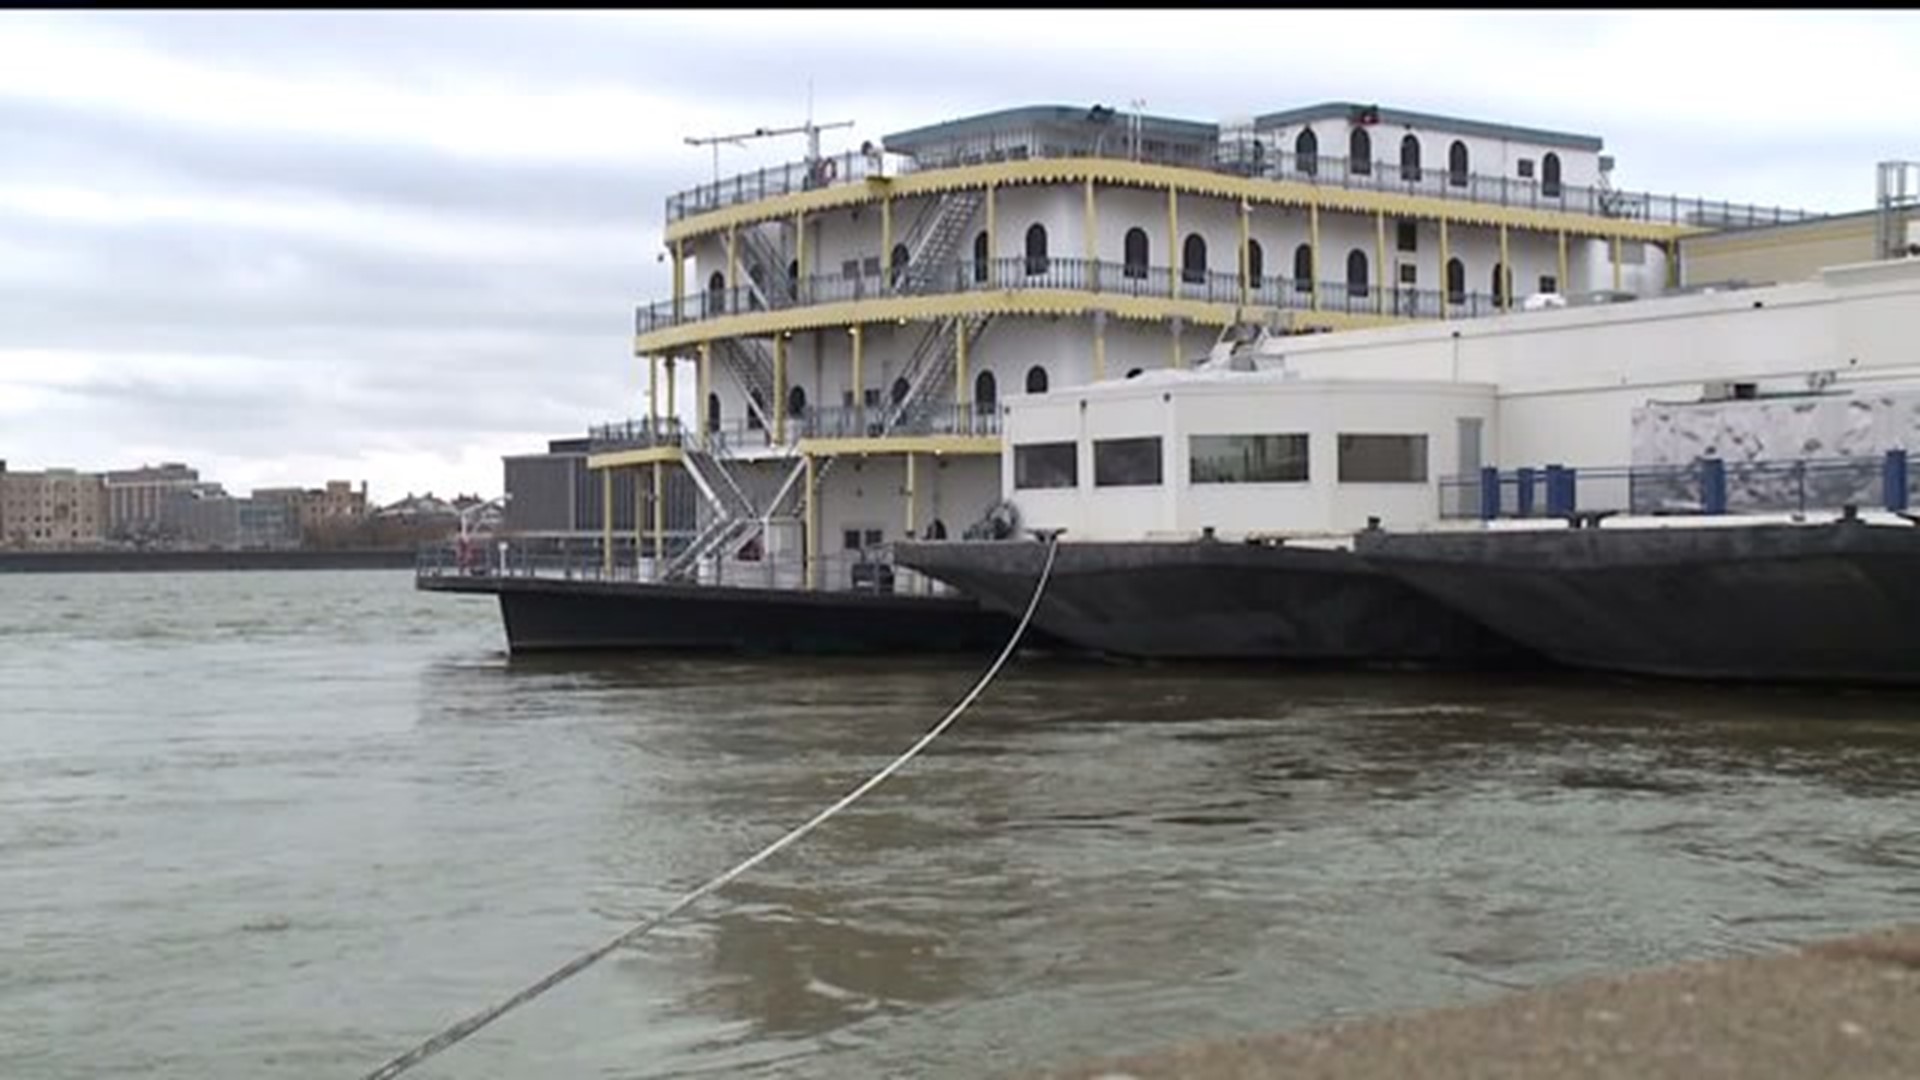 Former casino boat troubled in new waters